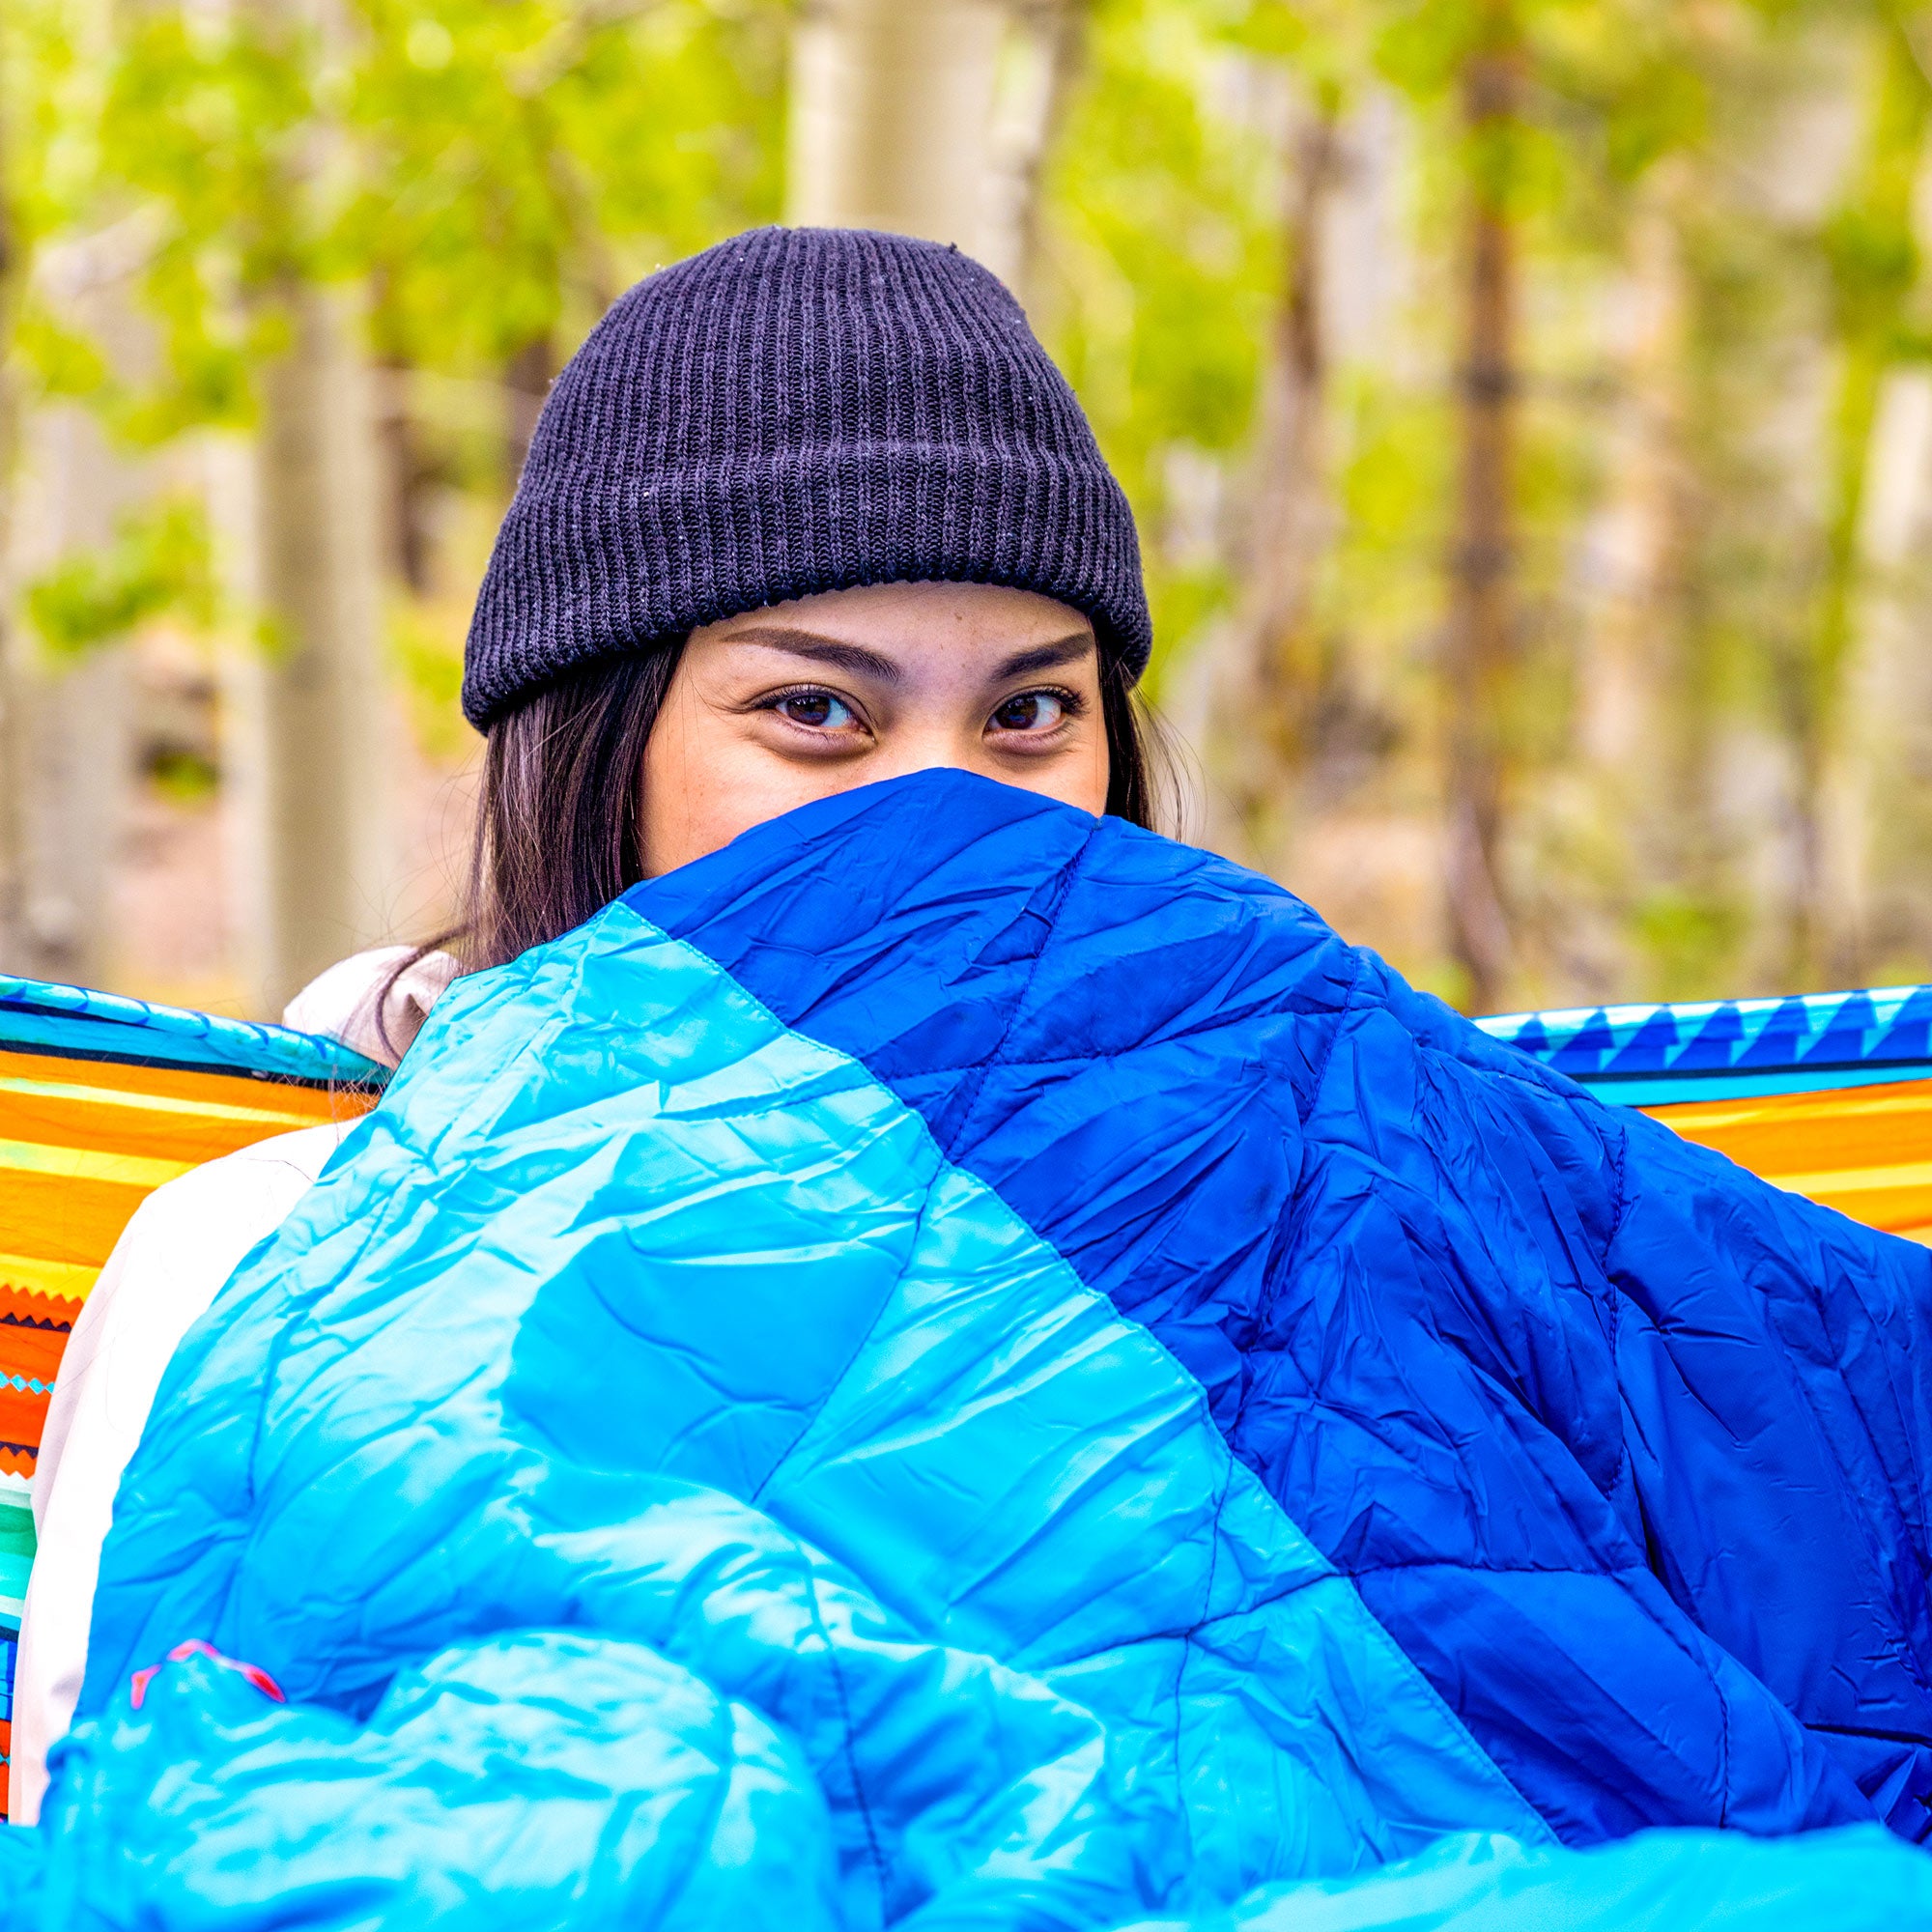 woman bundled up in the thermaquilt sitting in a hammock outside in a forest